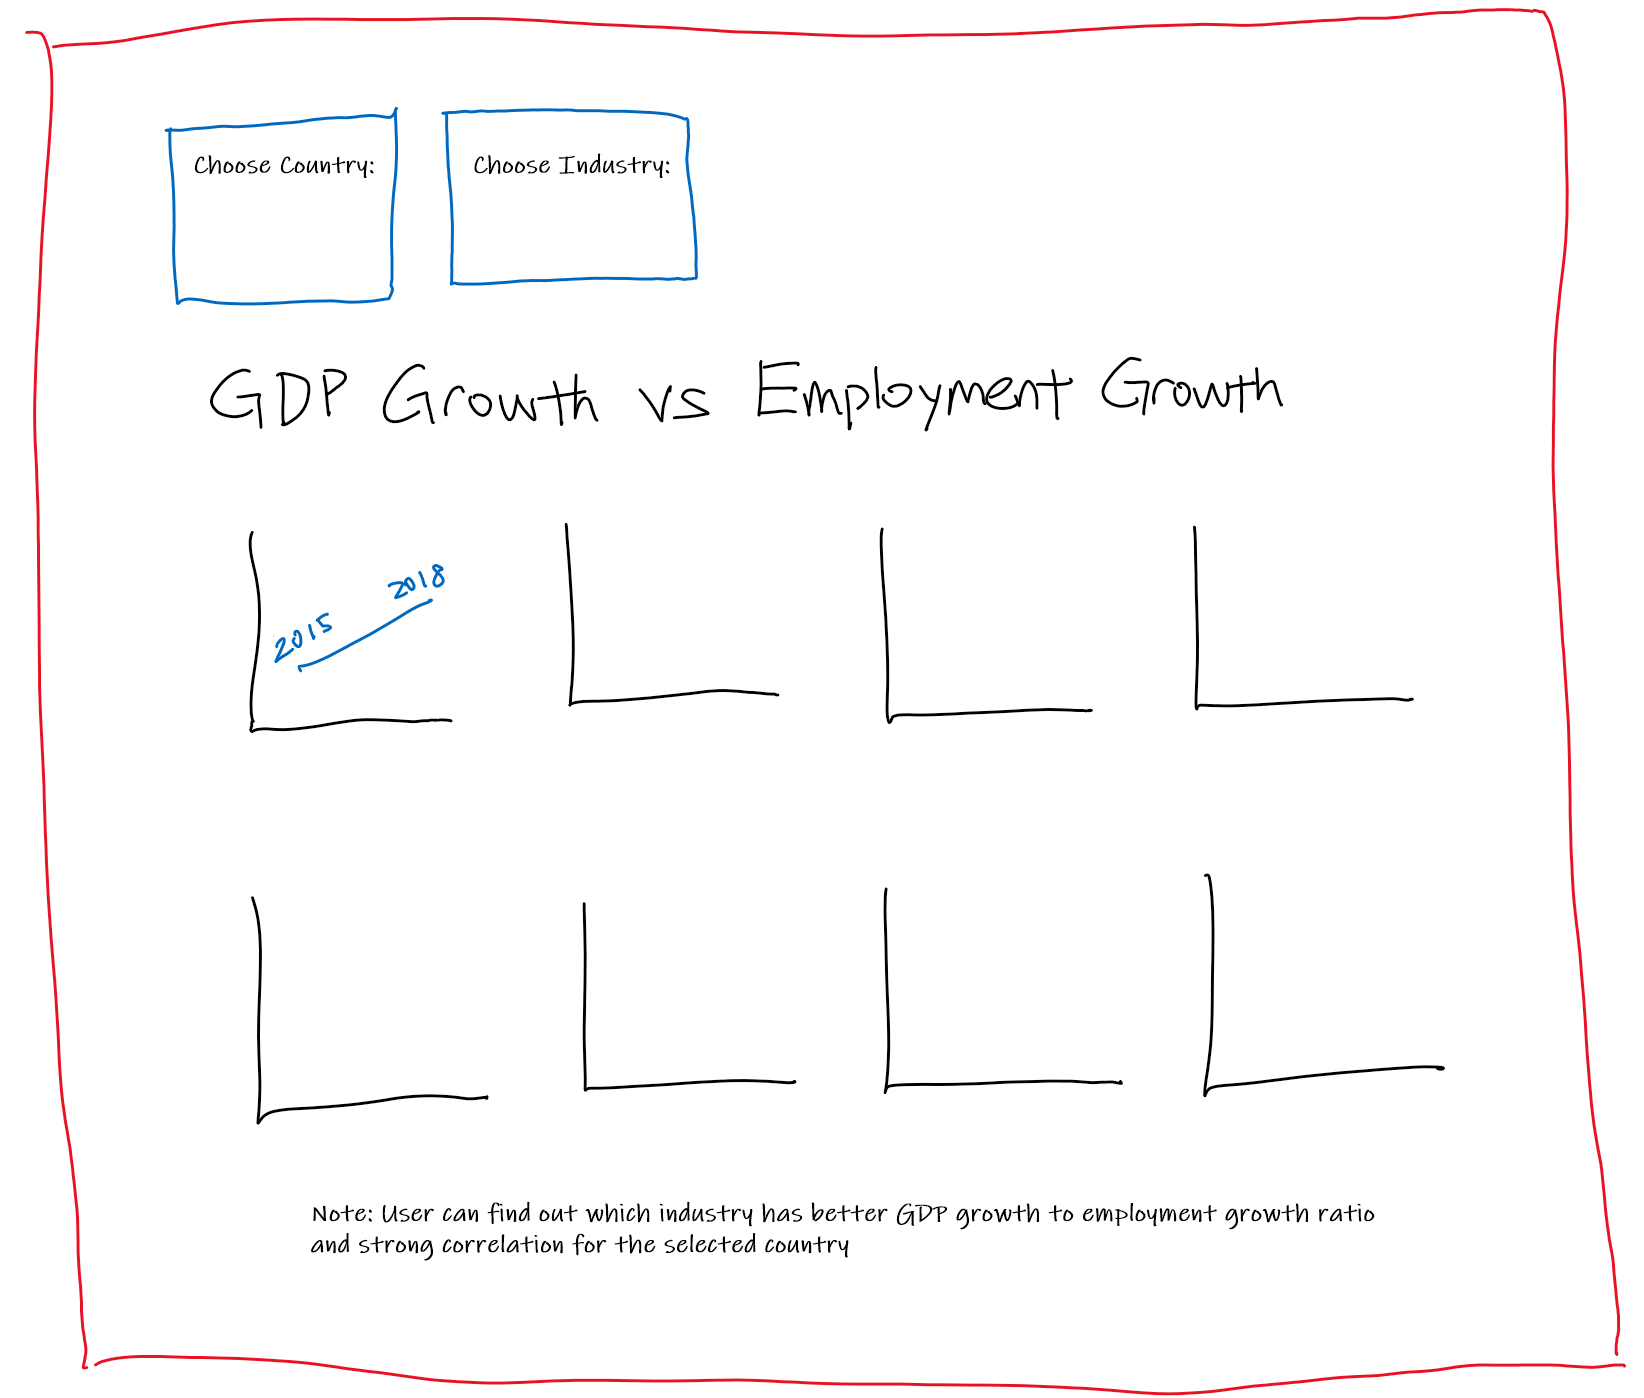 GDP Growth vs Employment Growth